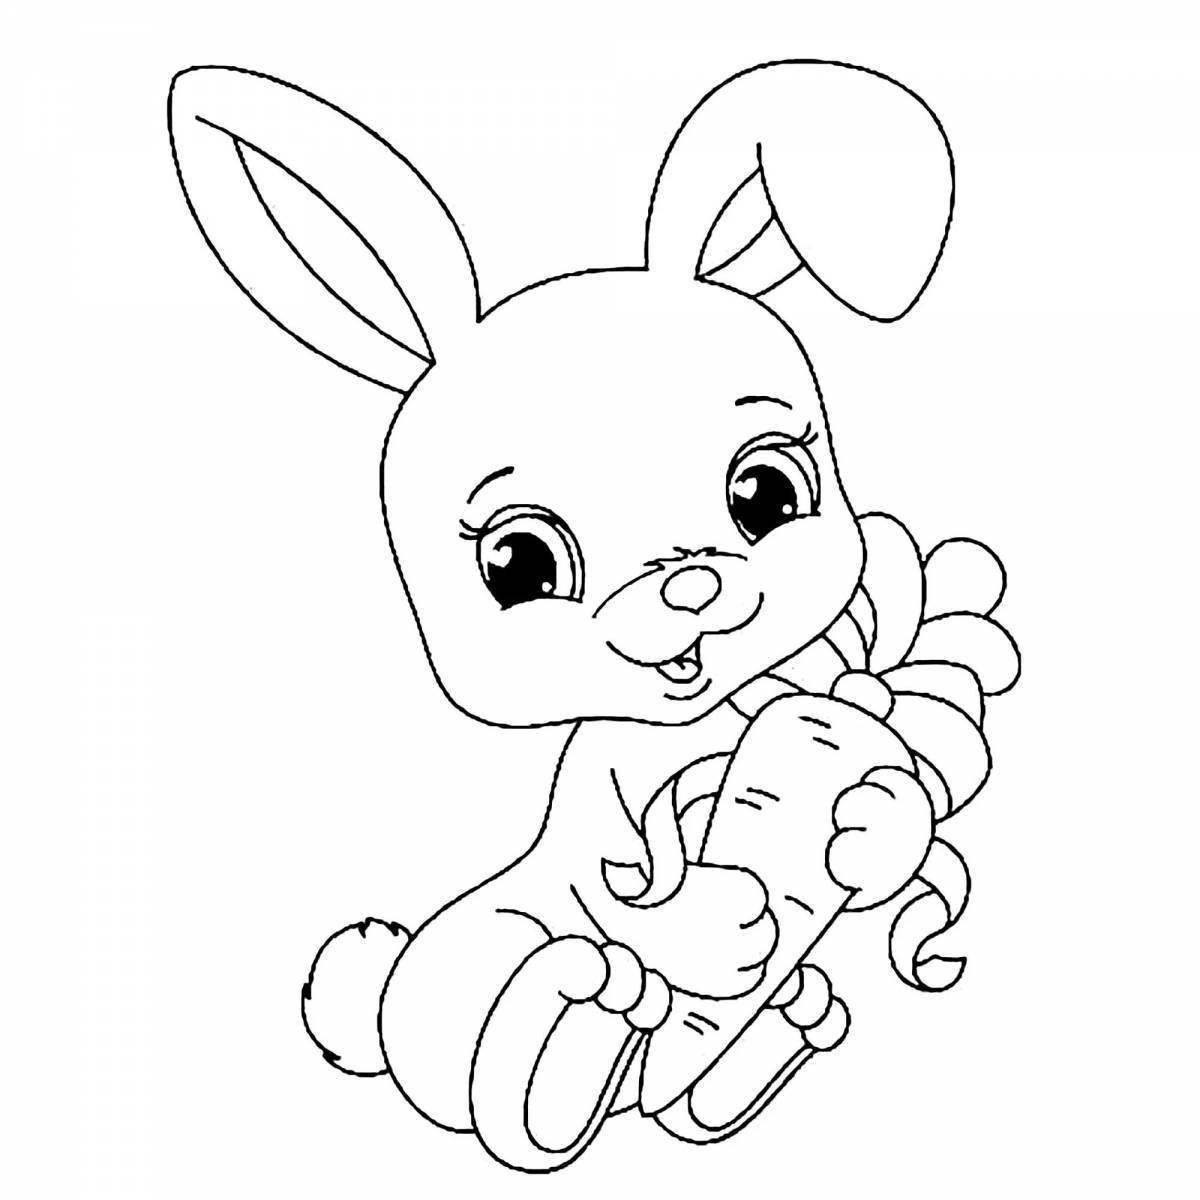 Adorable bunny coloring book for 6-7 year olds